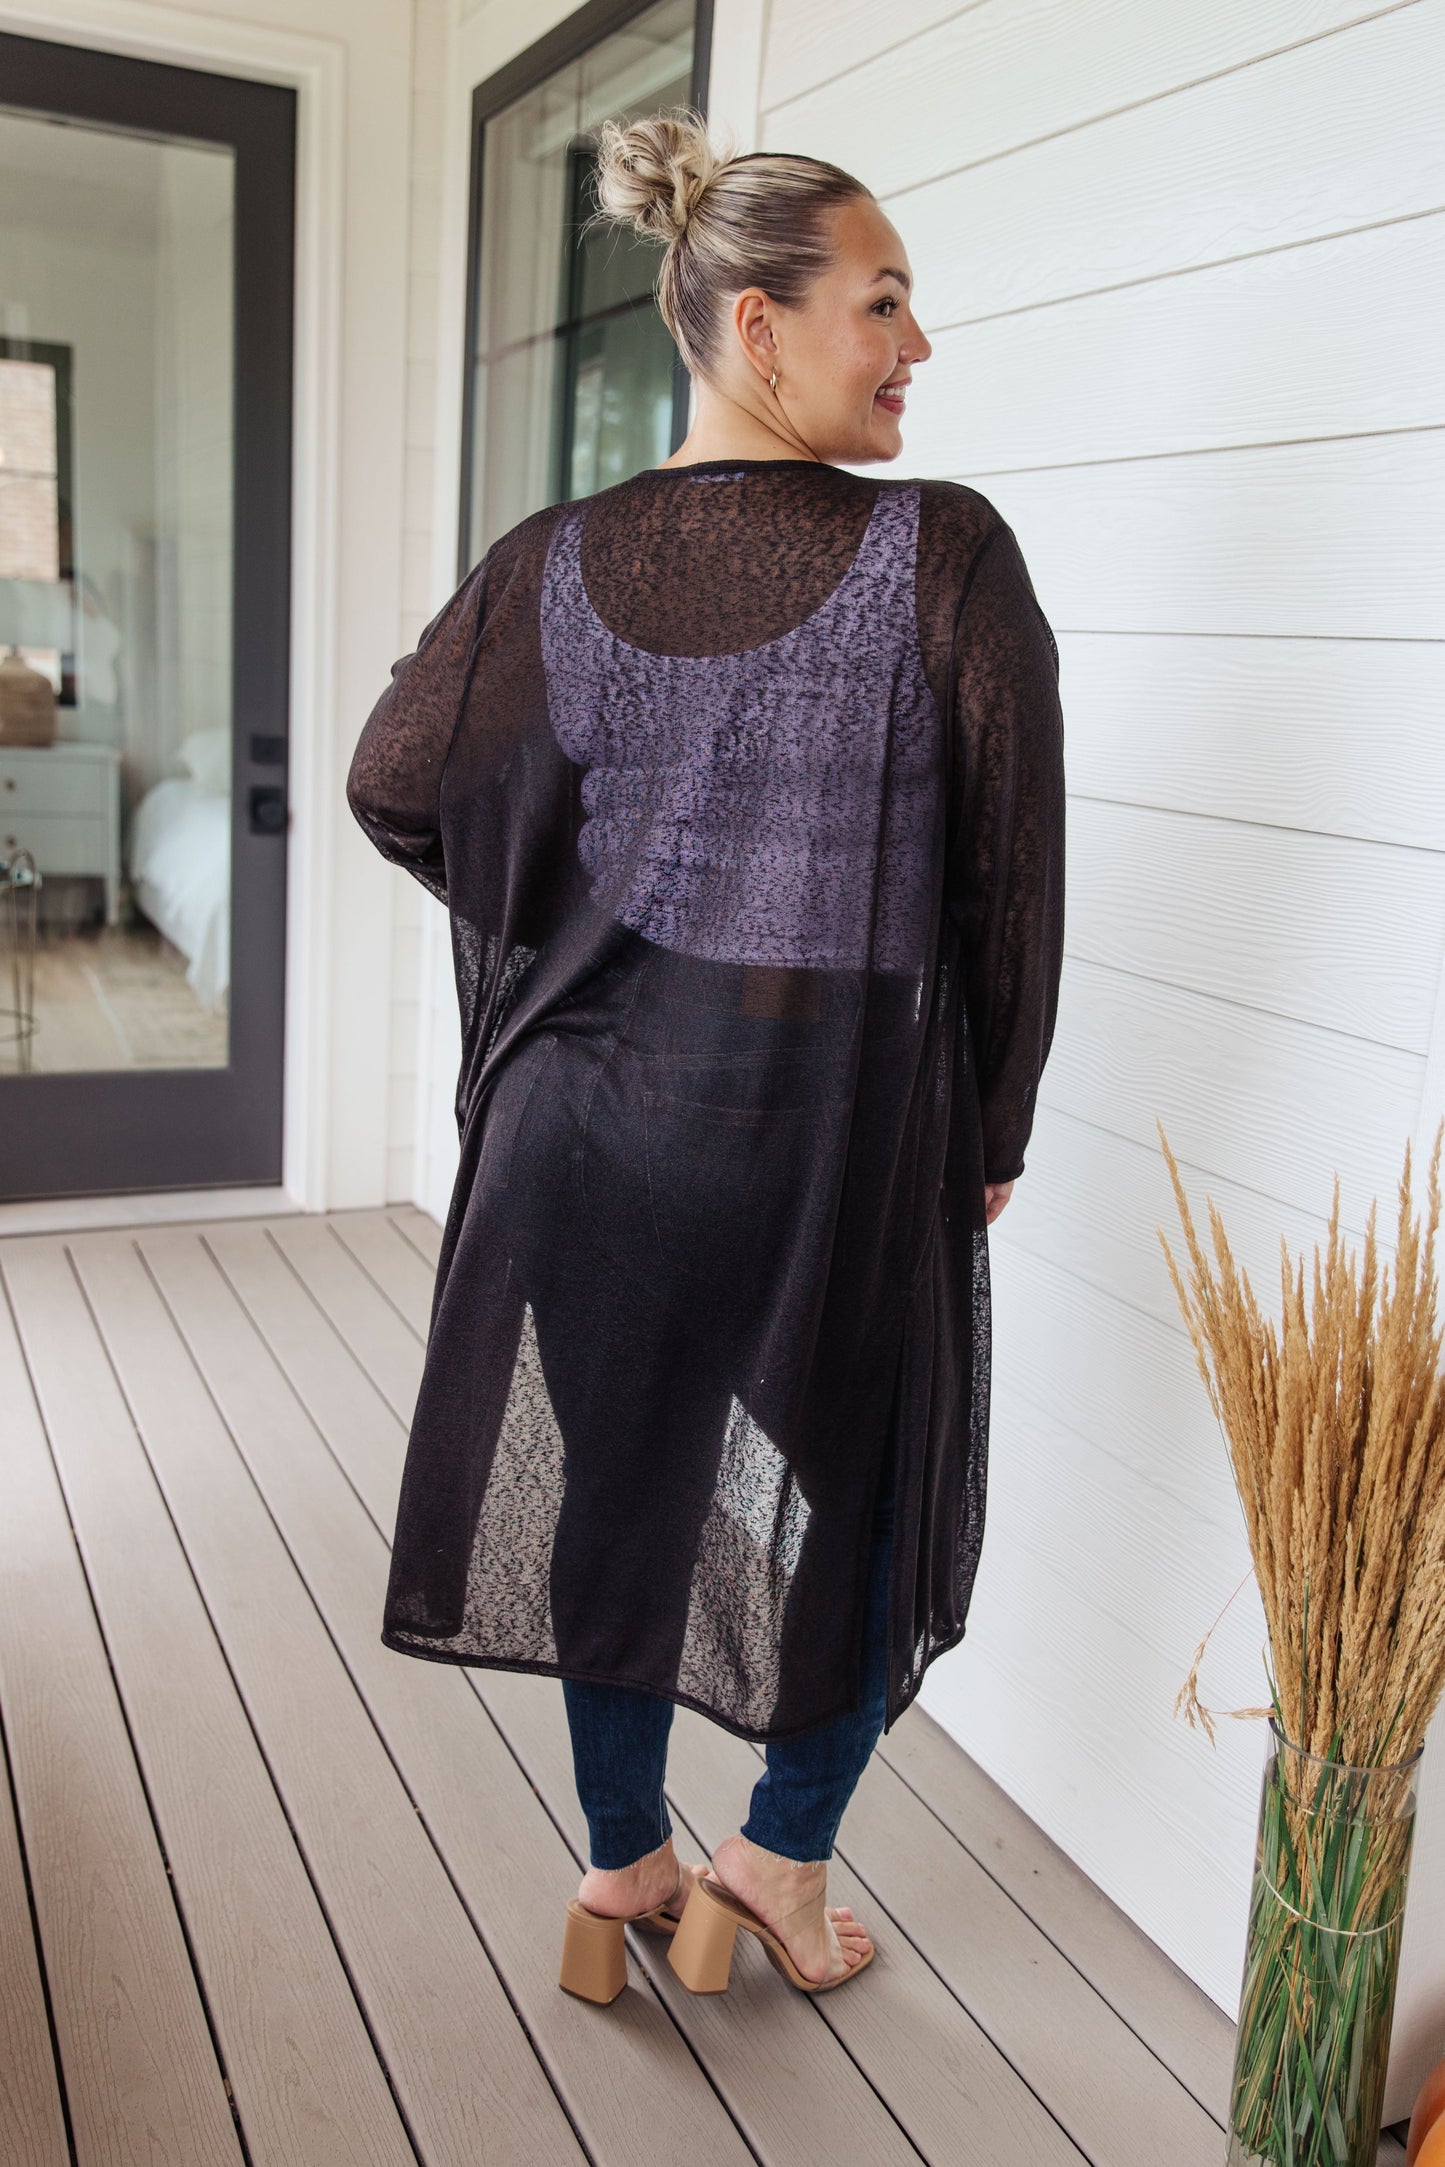 Afternoon Shade Sheer Cardigan - Three Bears Boutique